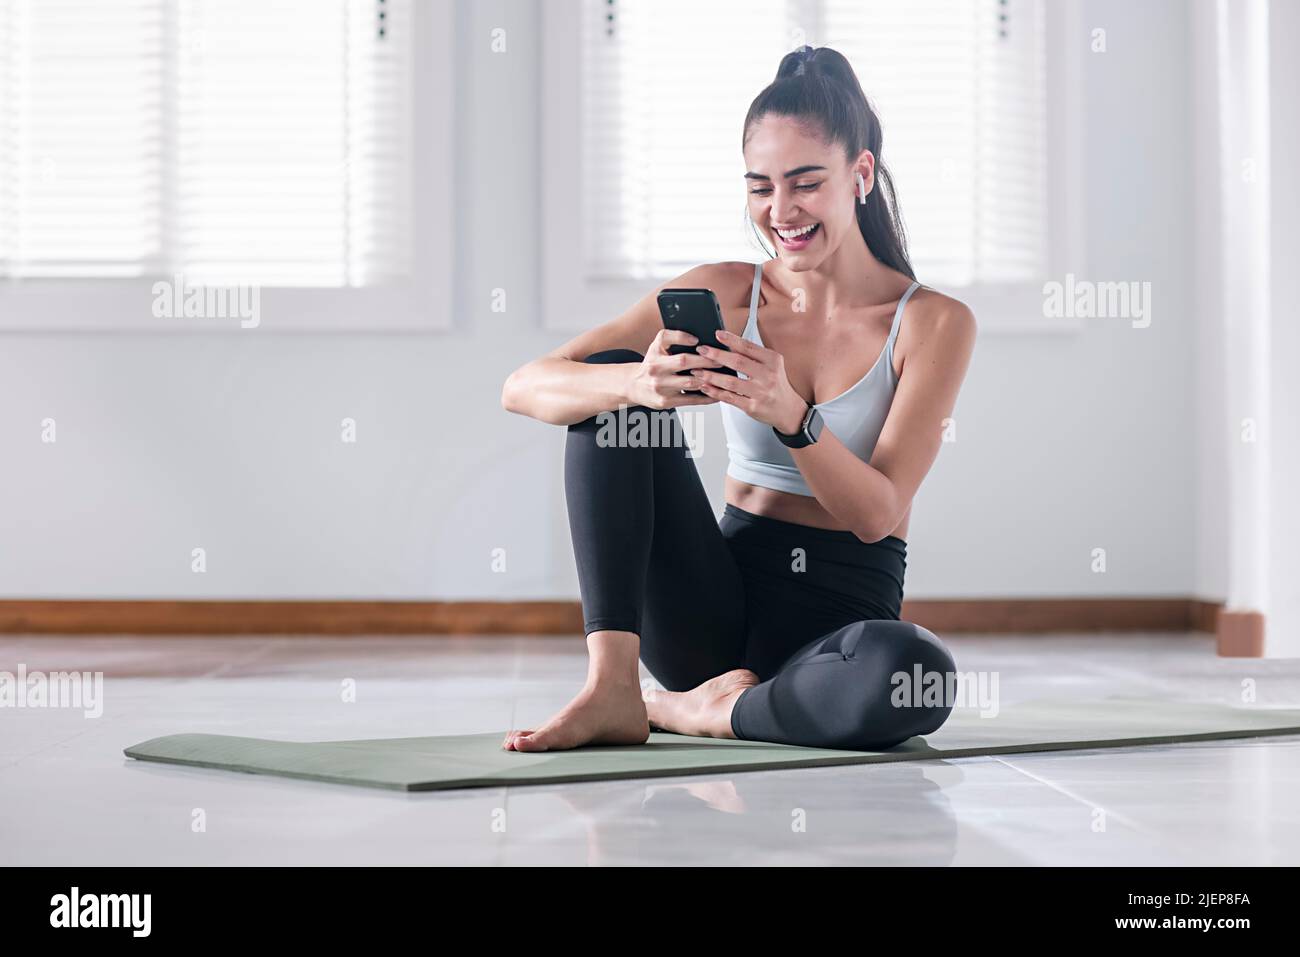 Young woman using a mobile phone post workout. High quality photo Stock Photo